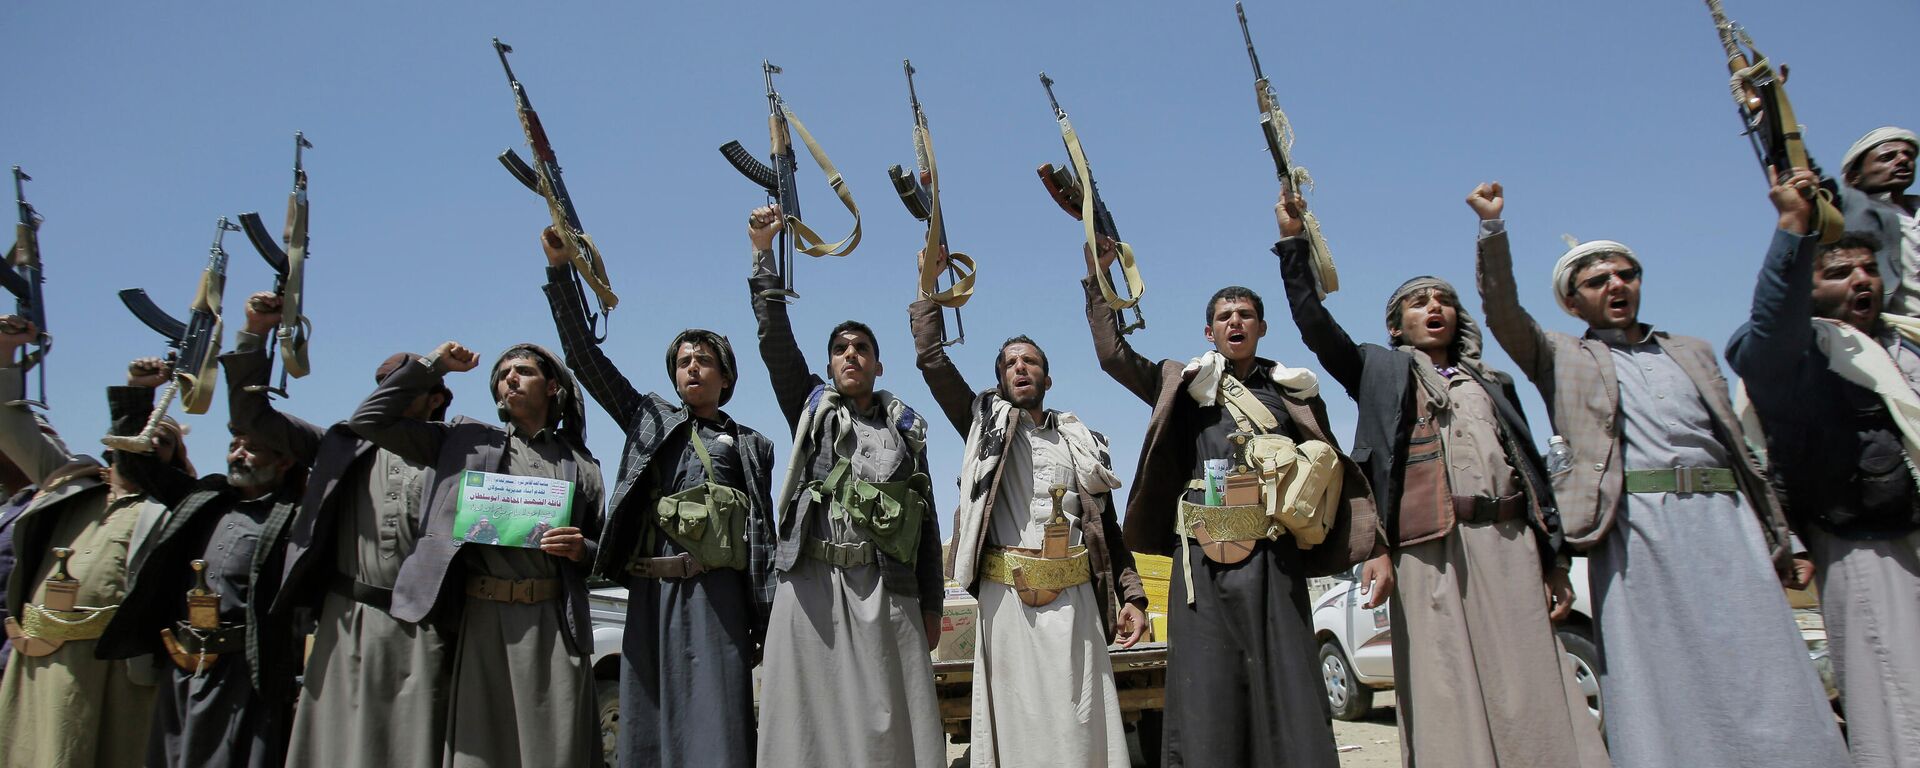 Shiite Houthi tribesmen hold their weapons as they chant slogans during a tribal gathering showing support for the Houthi movement, in Sanaa, Yemen, Saturday Sept. 21, 2019 - Sputnik International, 1920, 17.01.2024